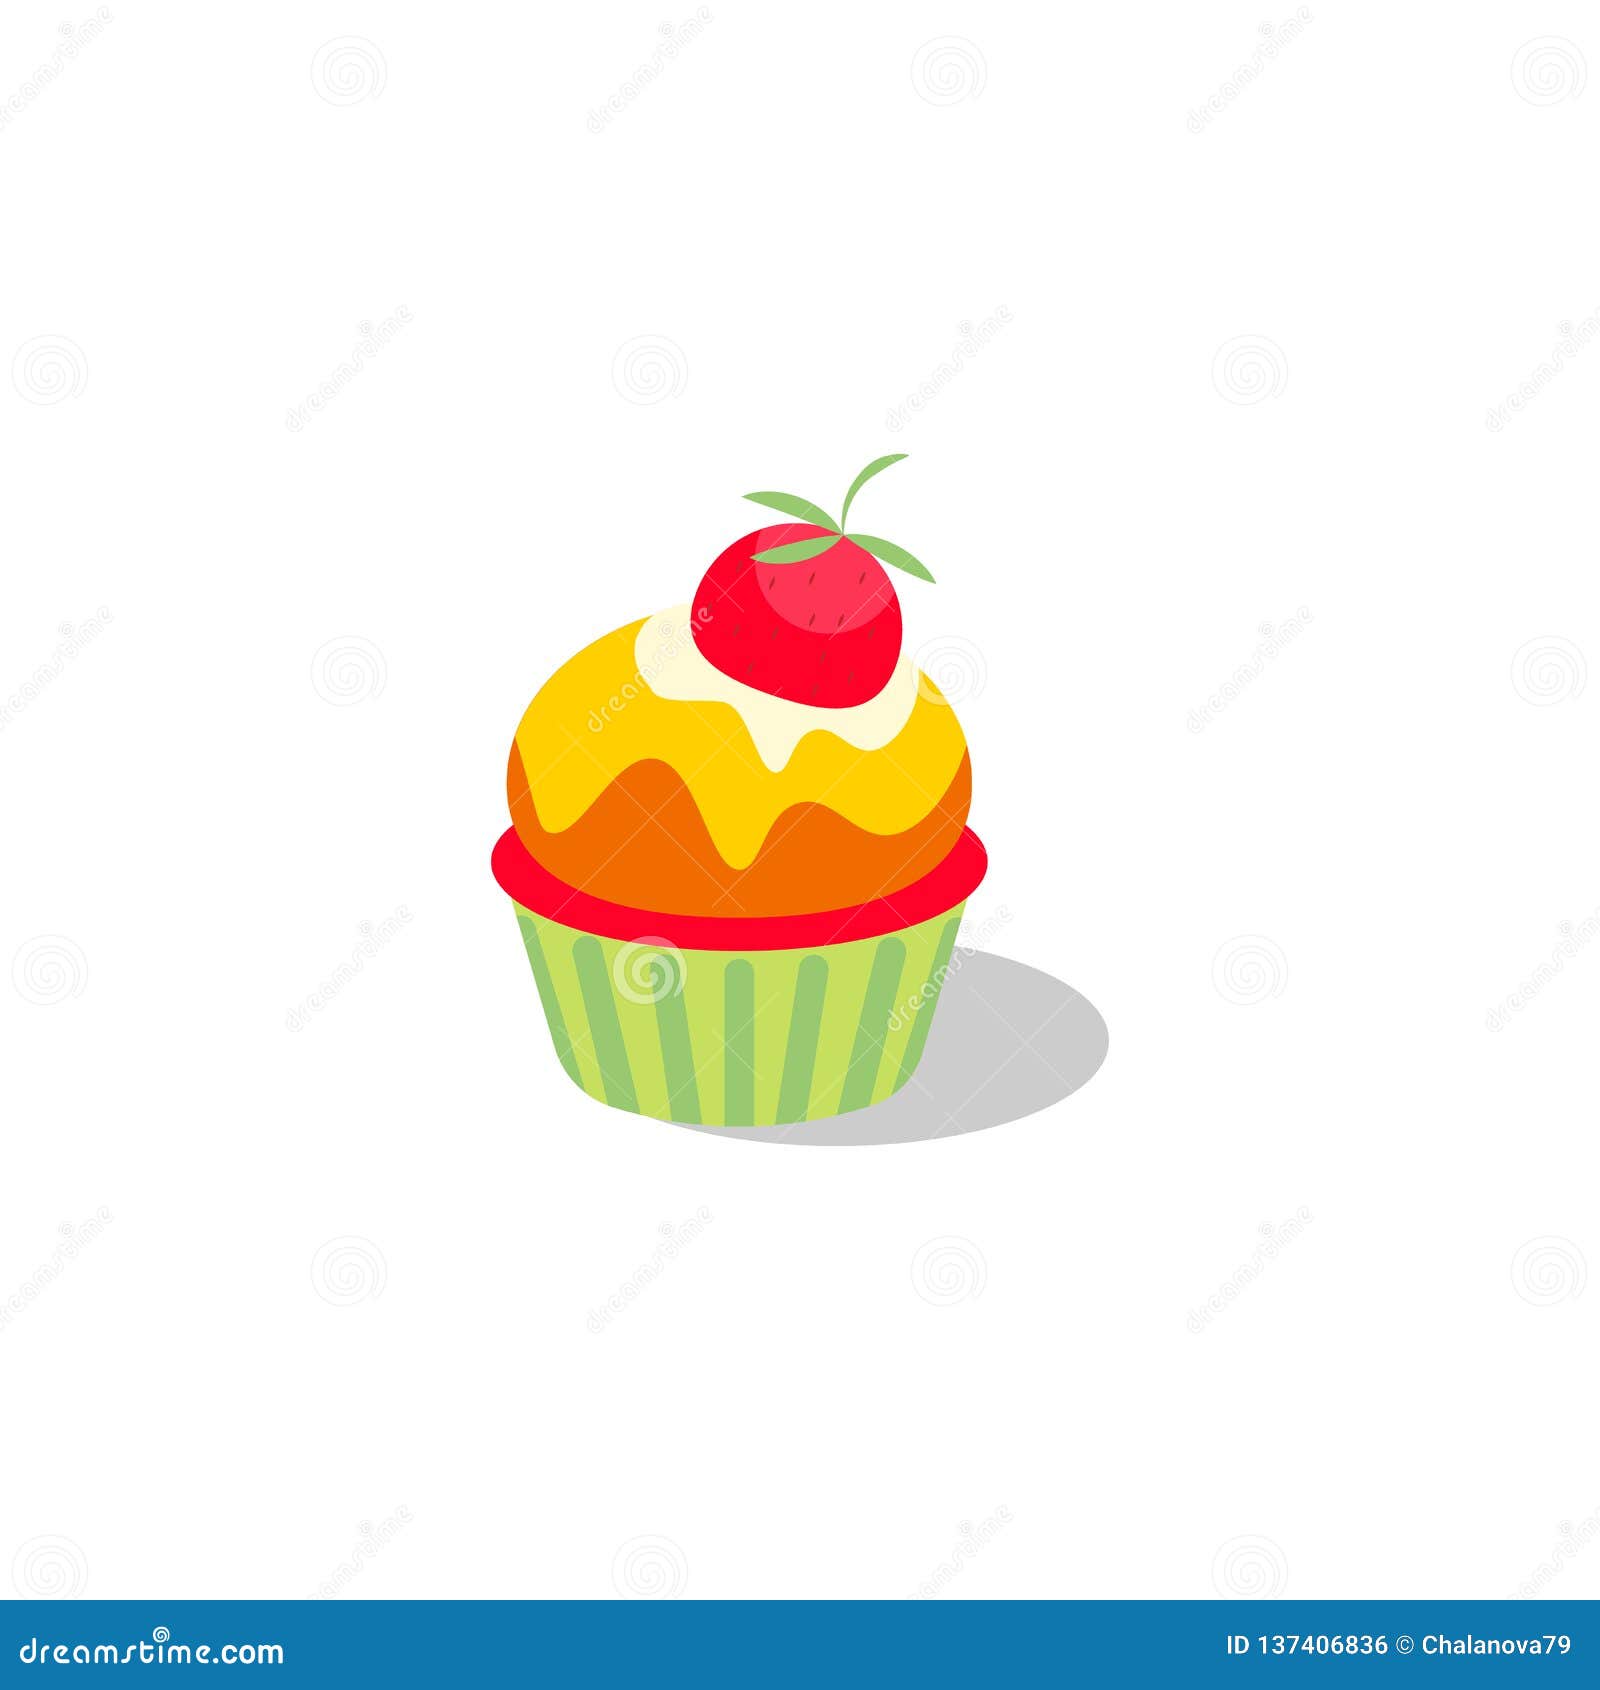 Vector Cupcake Illustration. Cake with Cream and Strawberry Stock ...